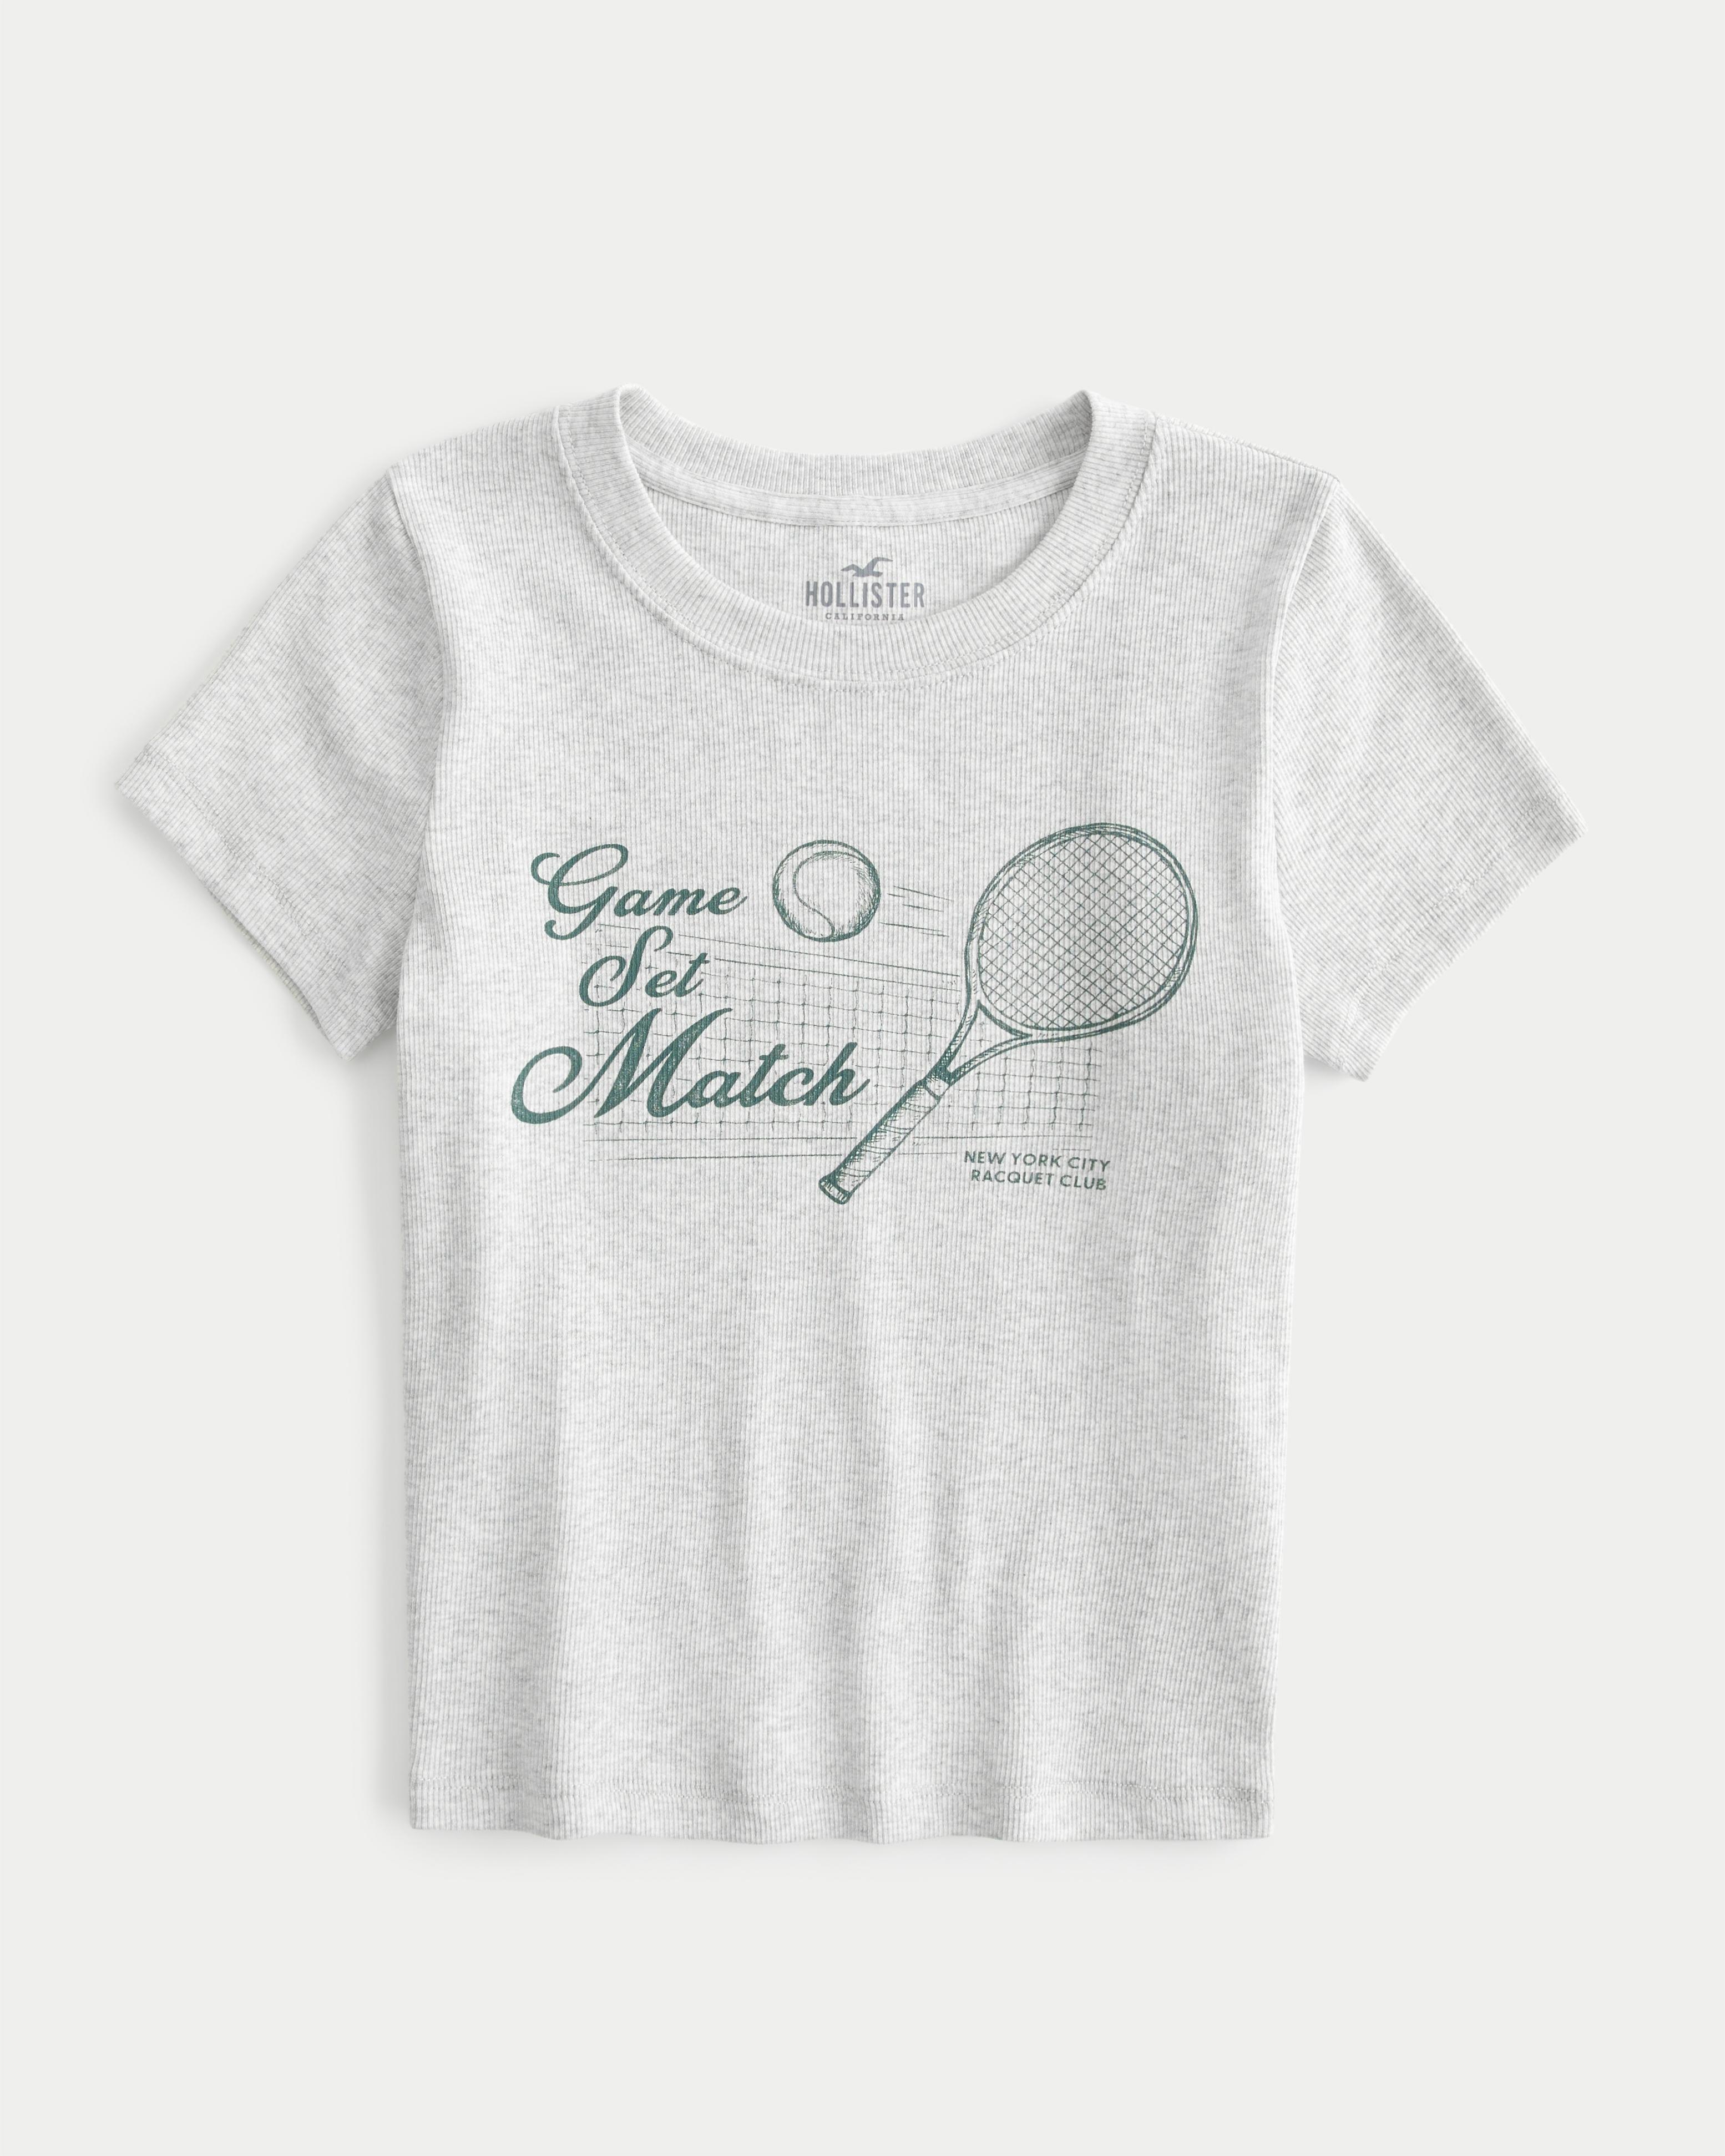 Hollister Game Set Match Tennis Graphic Ribbed Baby Tee in White | Lyst UK